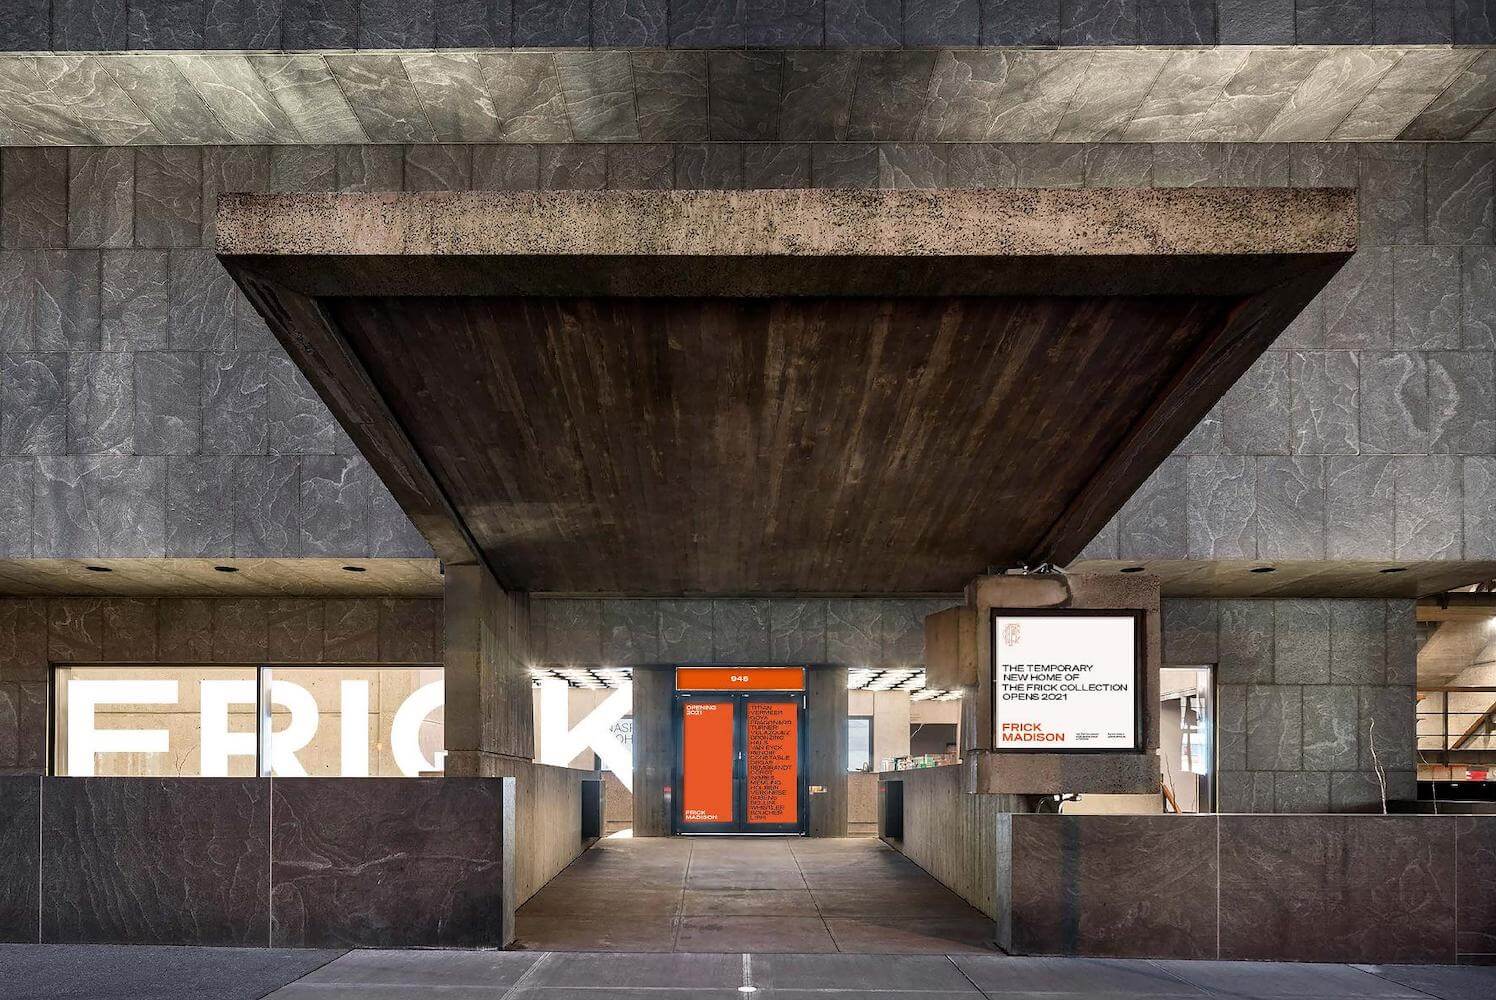 exterior rendering depicting the entrance to a Brutalist building with outstretched canopy